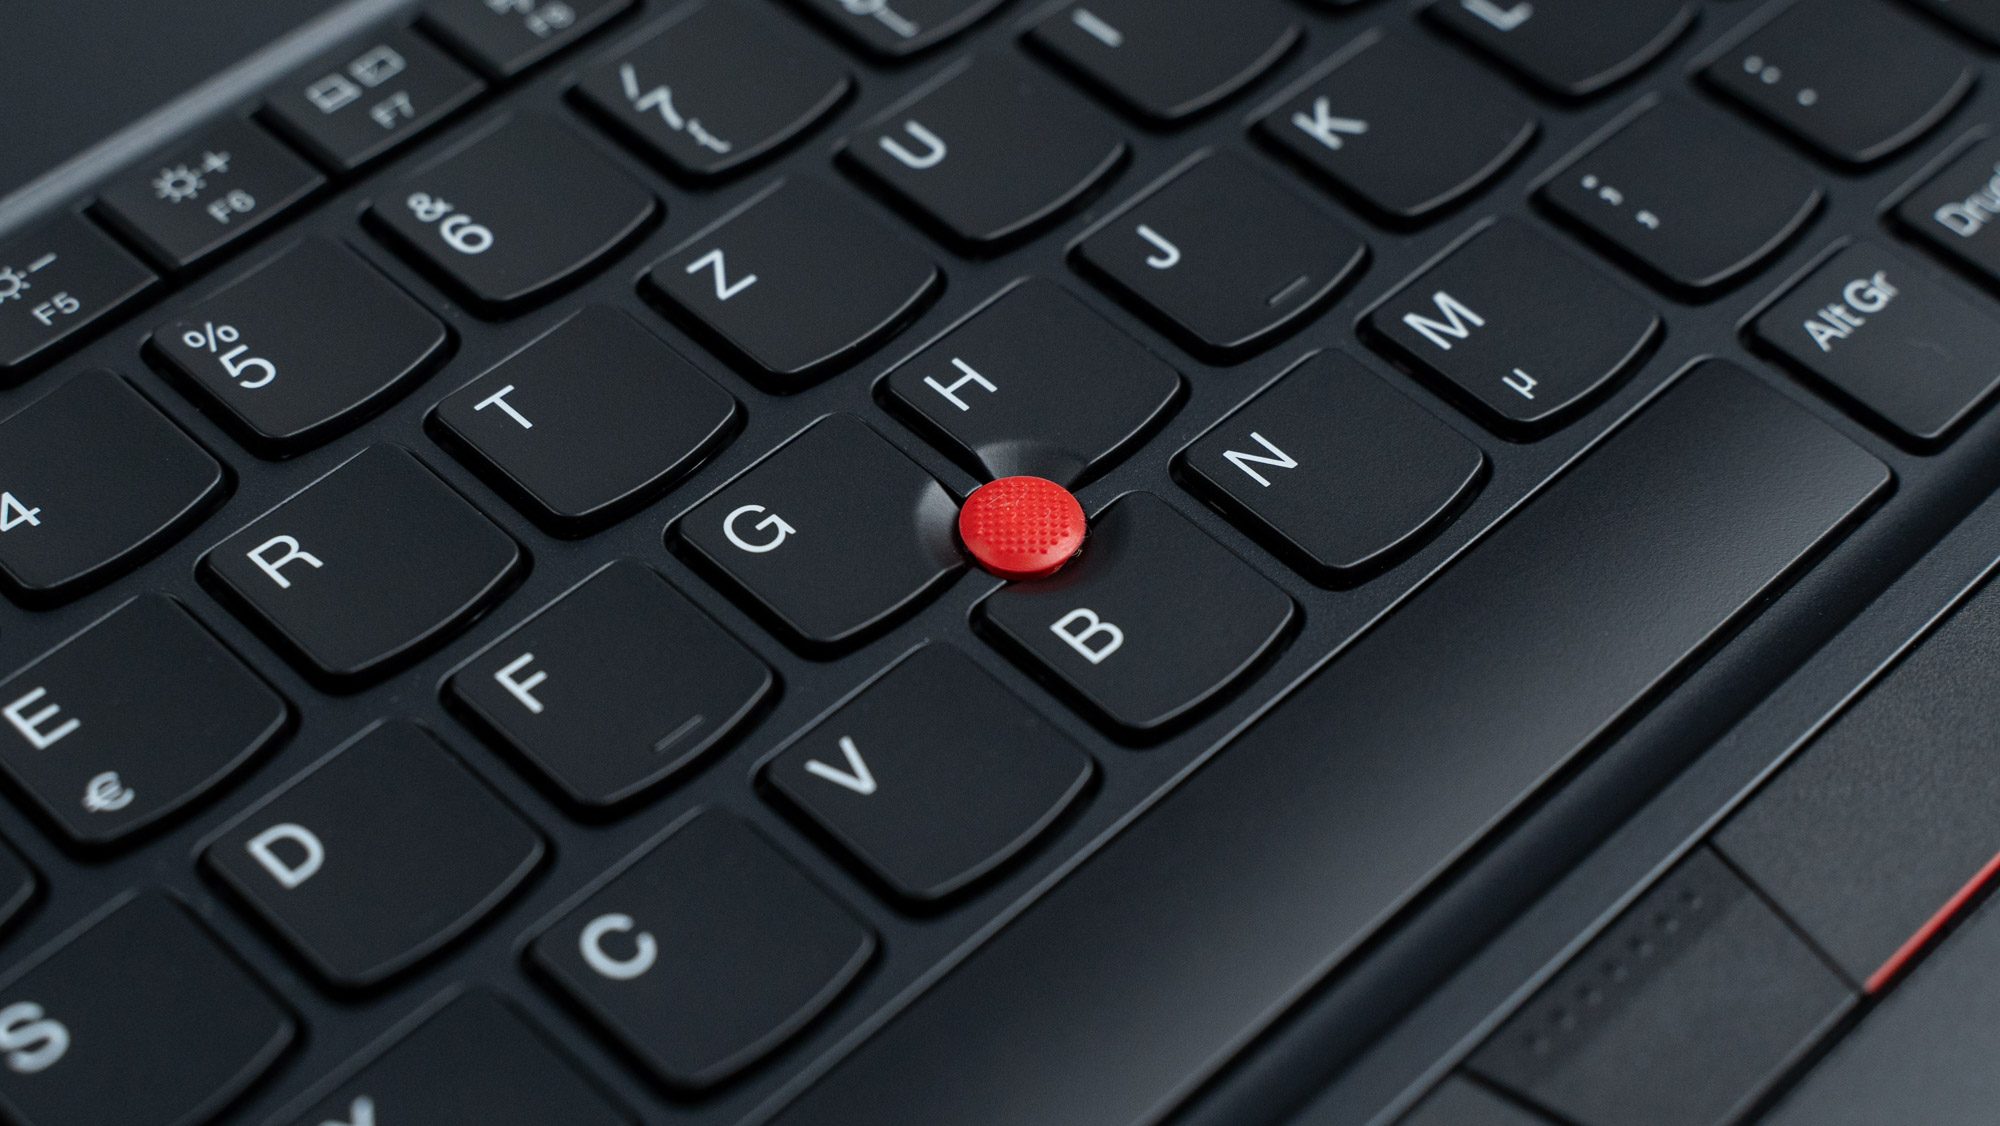 Roter Trackpoint inmitten des Keyboards.